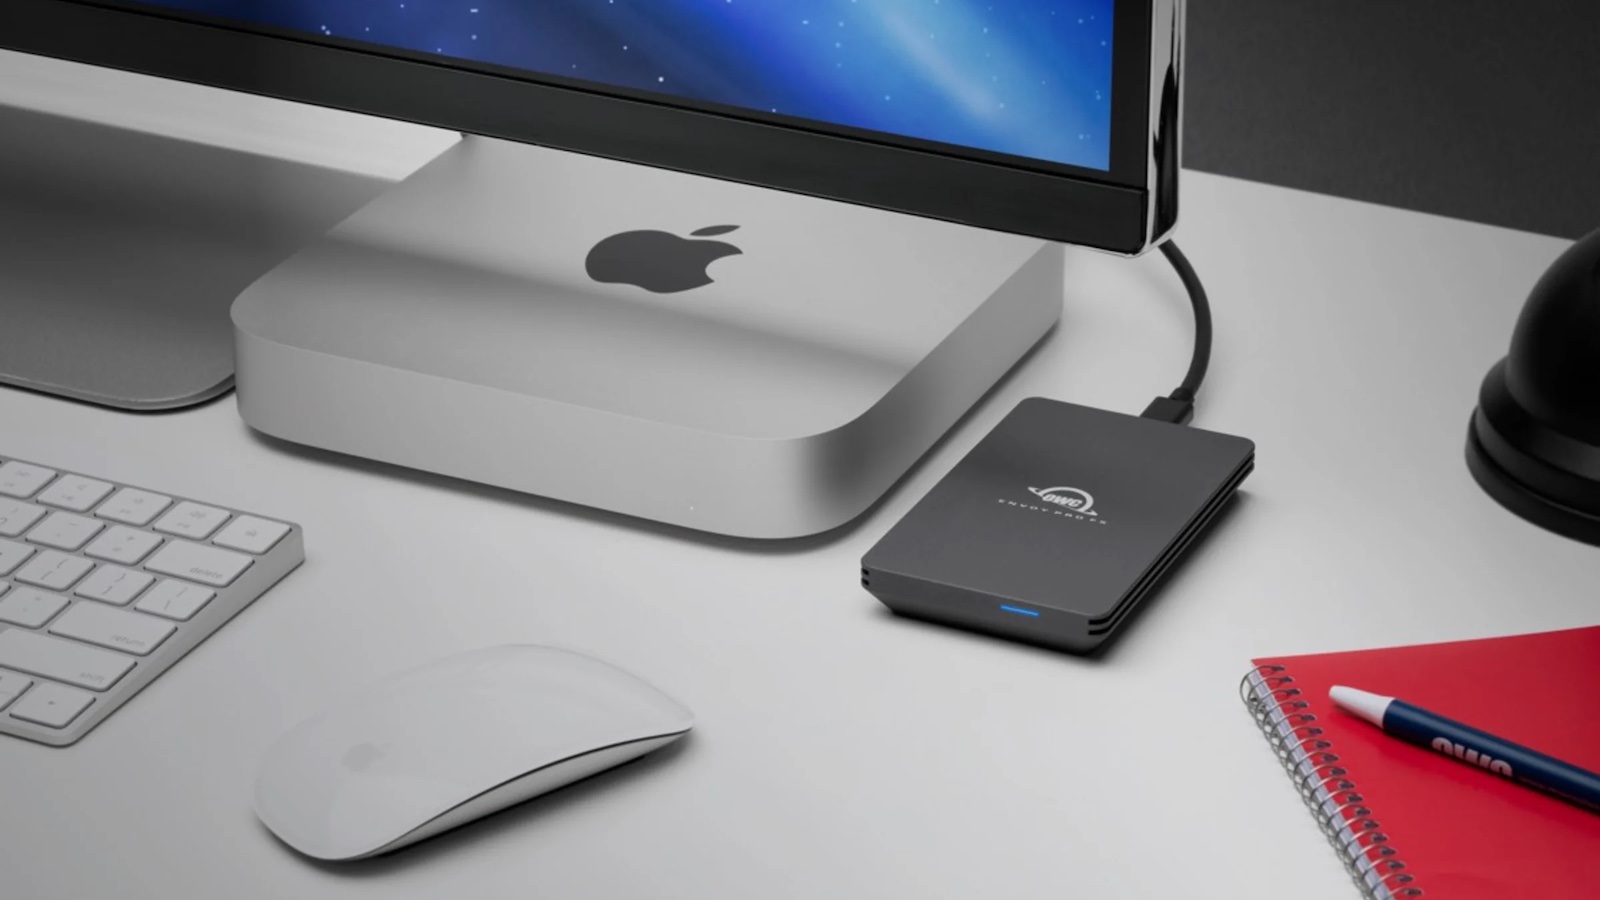 OWC’s Ultra-Fast Portable SSD for Thunderbolt 3 Macs Now Available With Up to 4TB of Storage